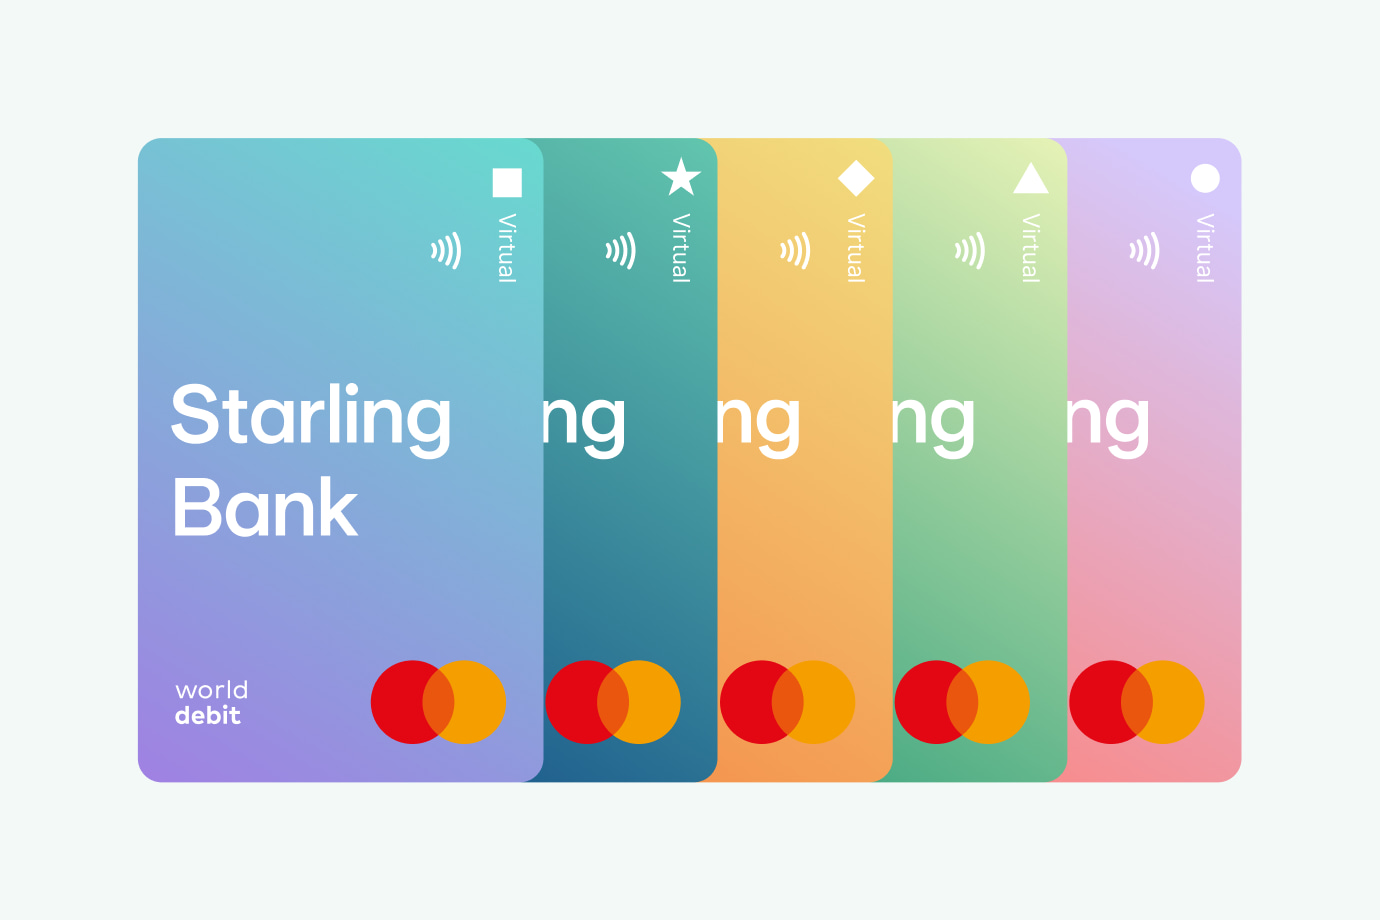 Starling Bank's multi-coloured virtual cards